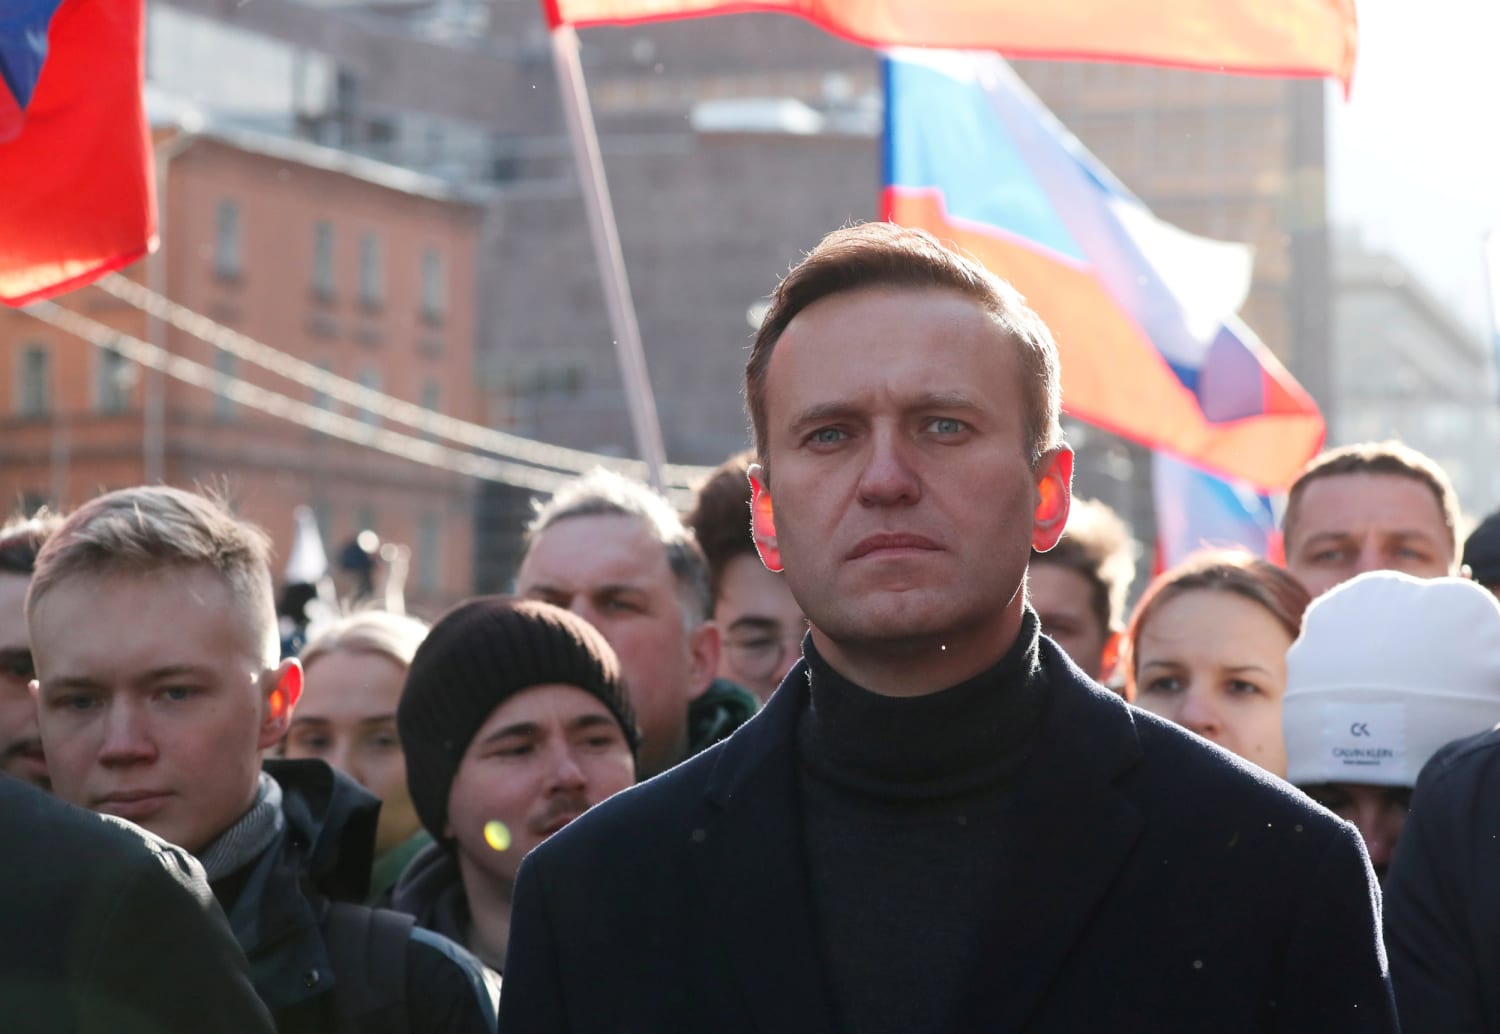 Alexei Navalny, opponent of Putin, improving after suspected poisoning,  hospital says